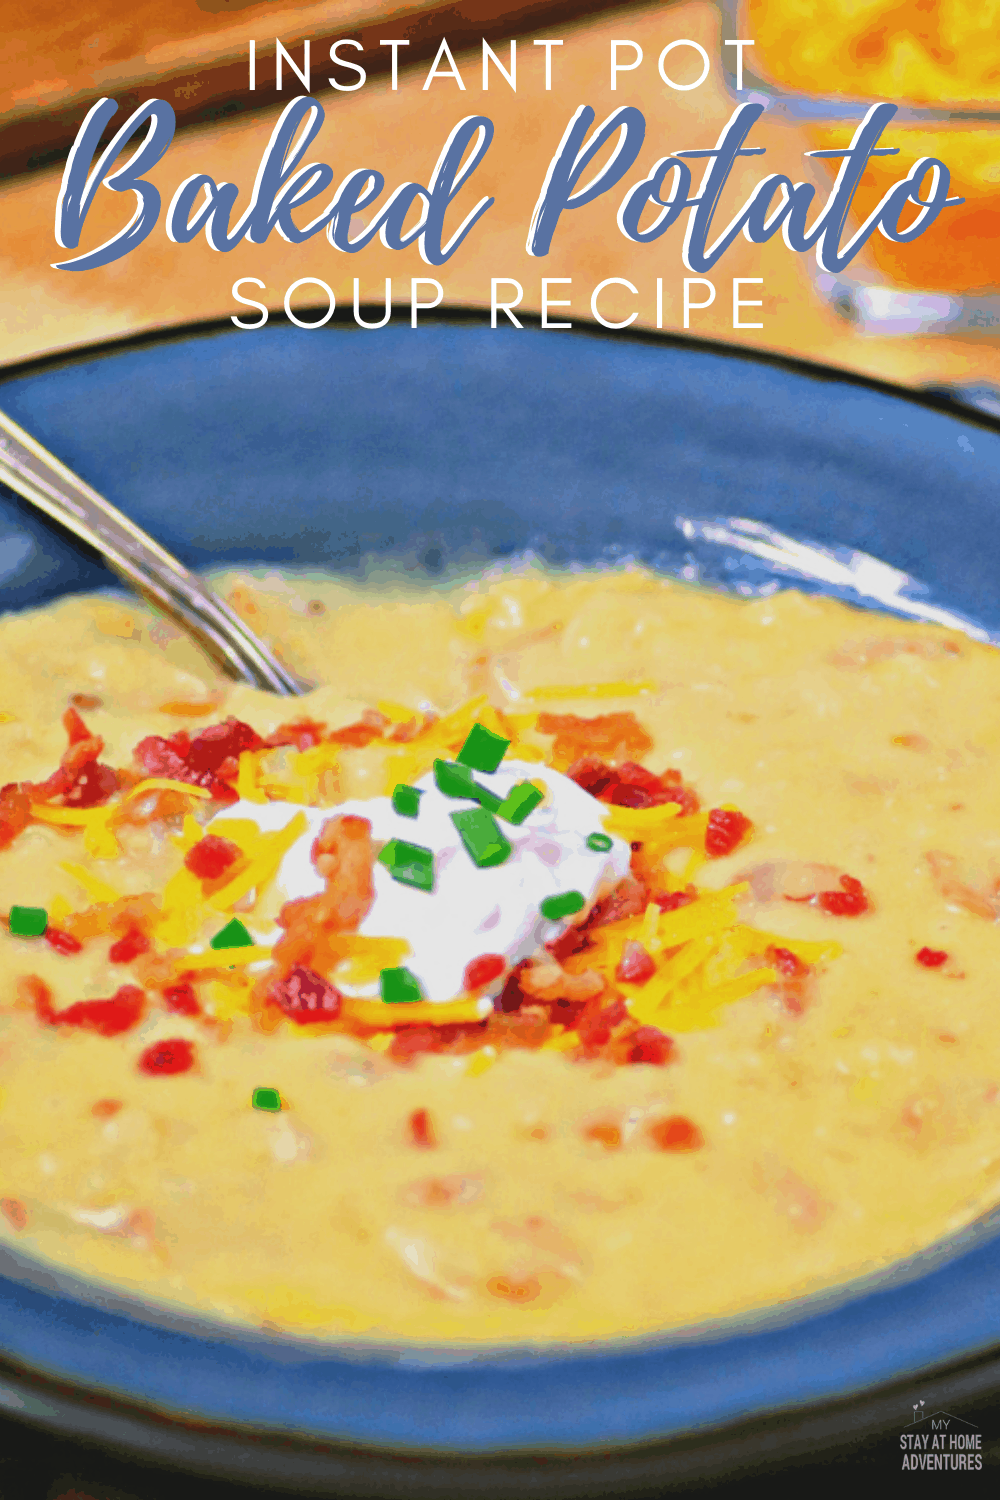 We have the best Instant Pot Baked Potato Soup recipe that you have to try this winter. Super creamy and loaded the way you are going to love. #Instantpot #Instantpotsoup #potatosoup via @mystayathome